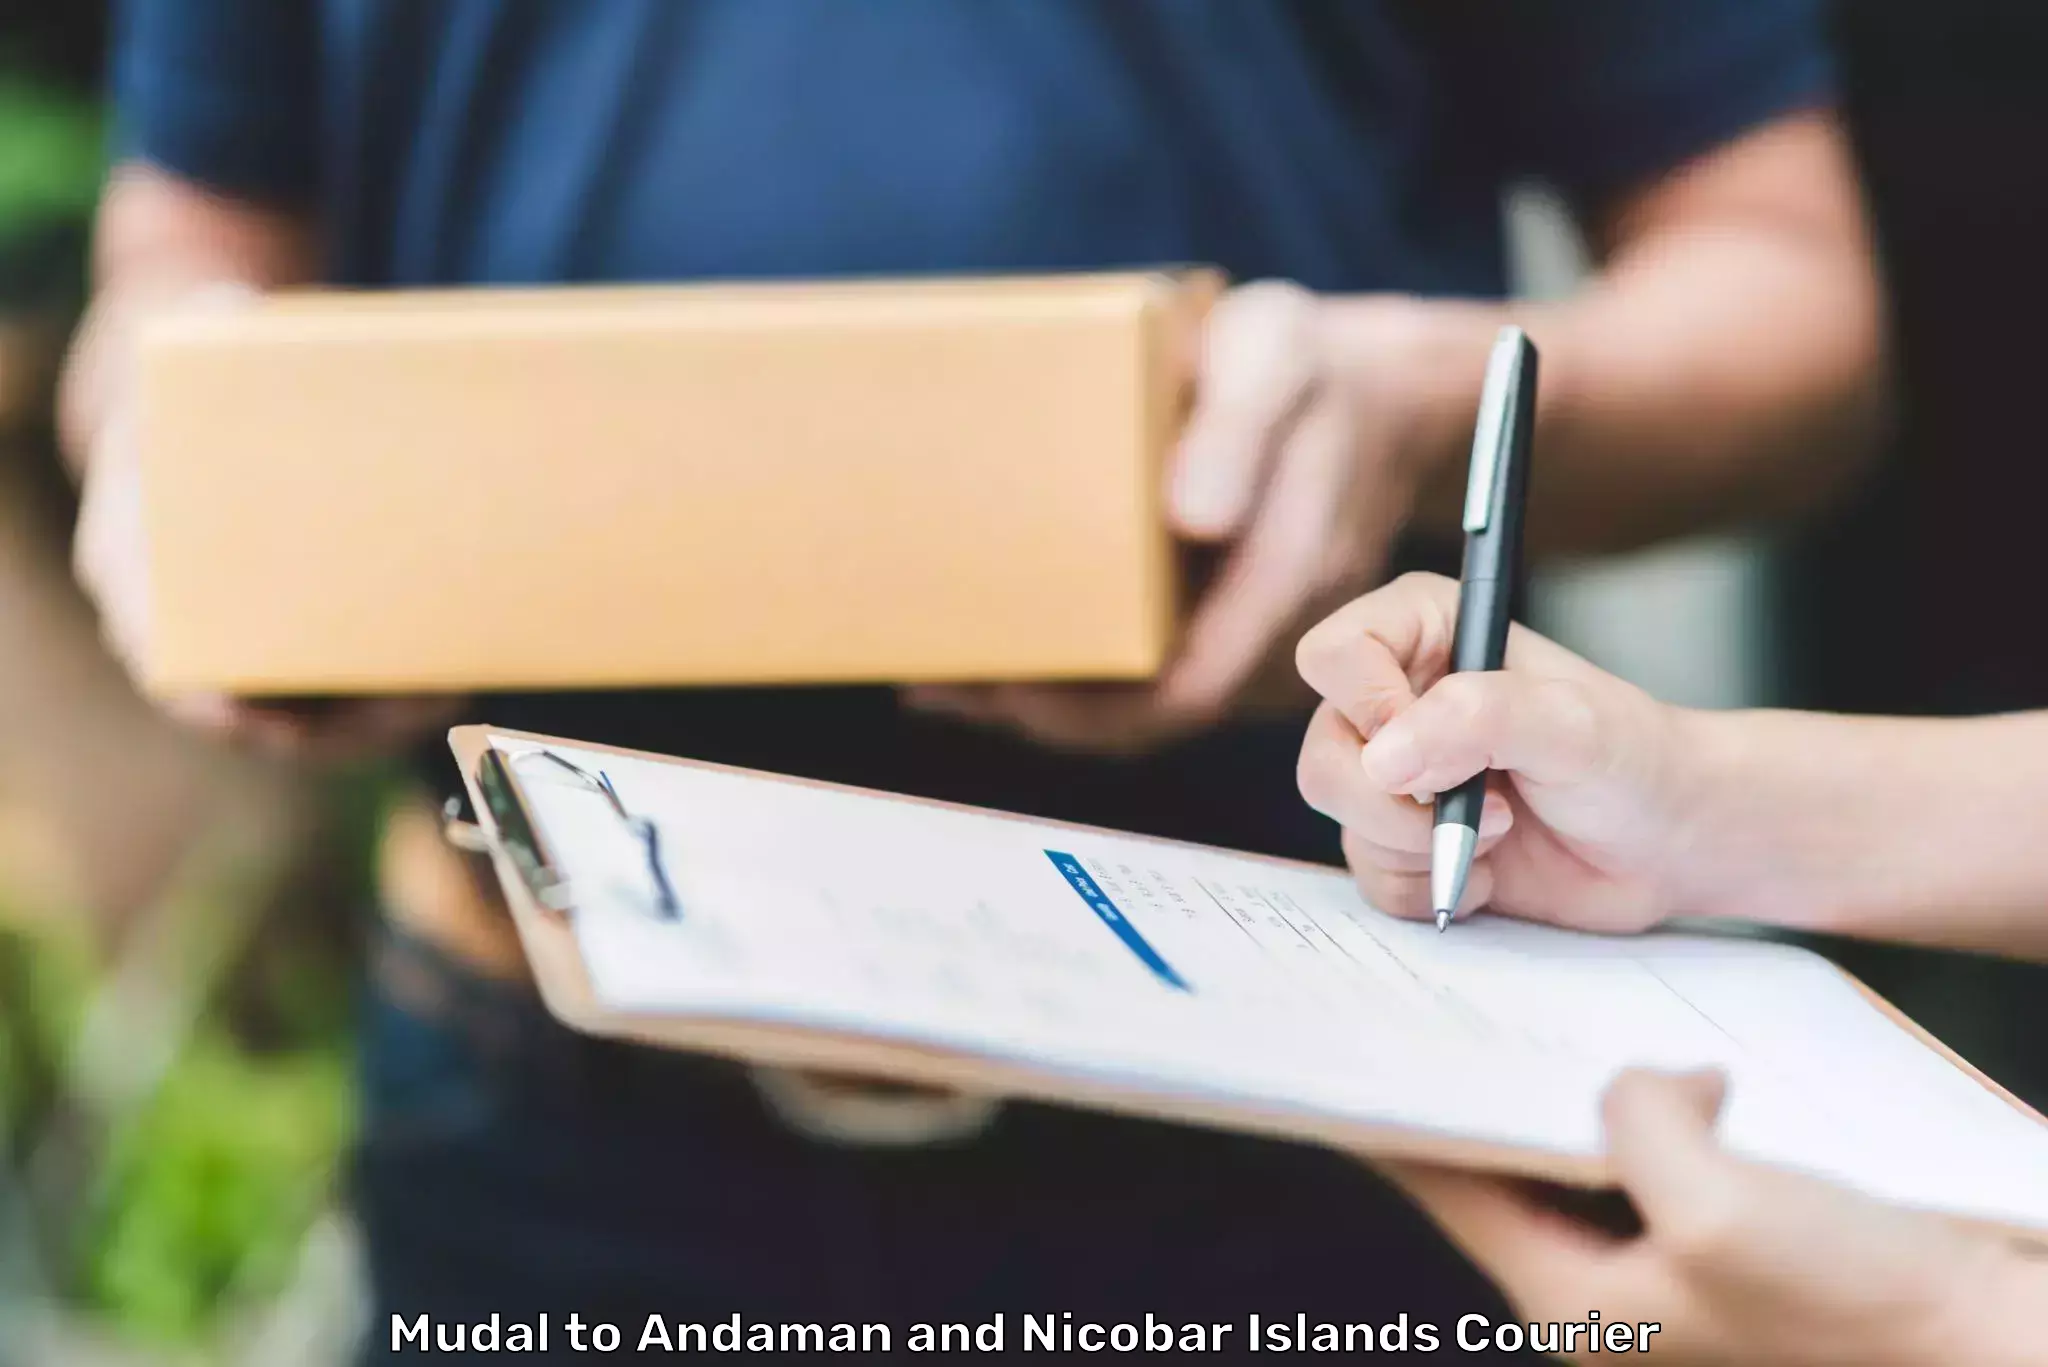 Professional courier handling Mudal to Andaman and Nicobar Islands